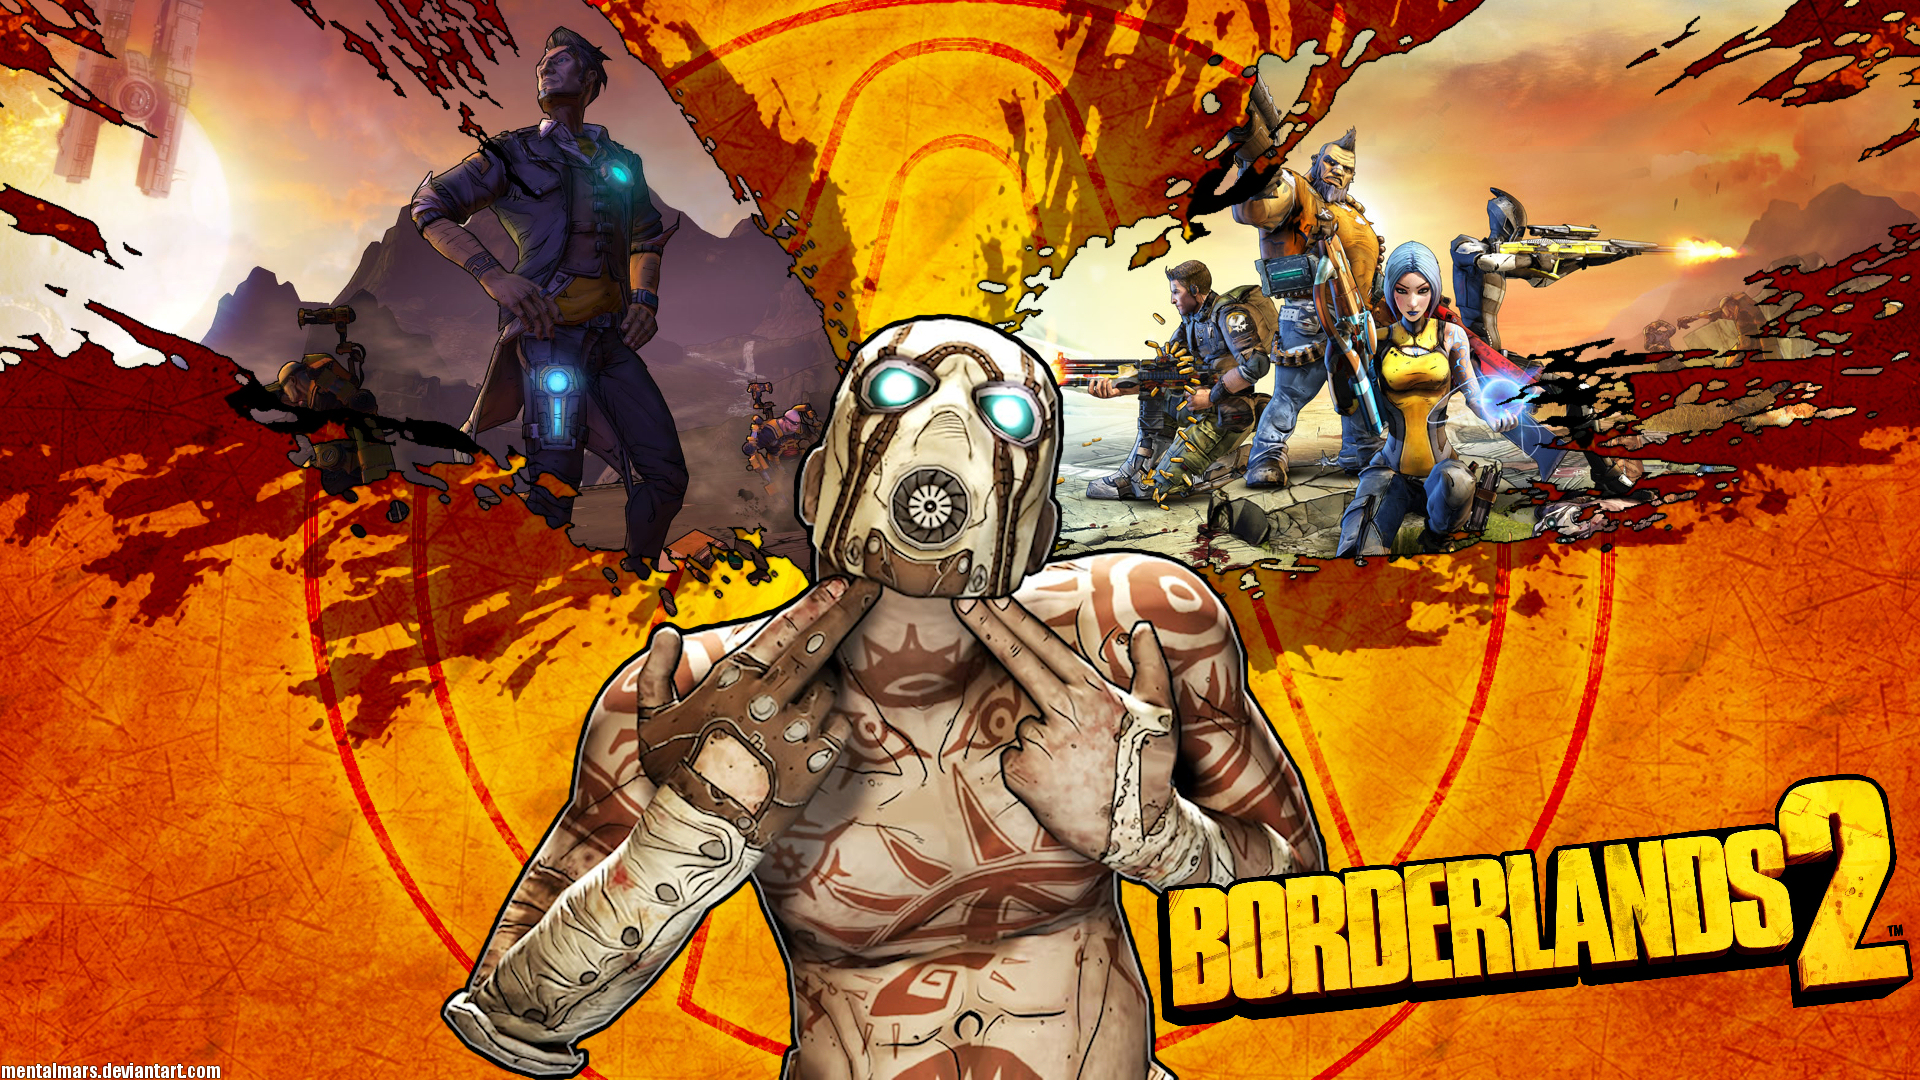 Borderlands 2 is free on Steam this weekend   Gaming Central